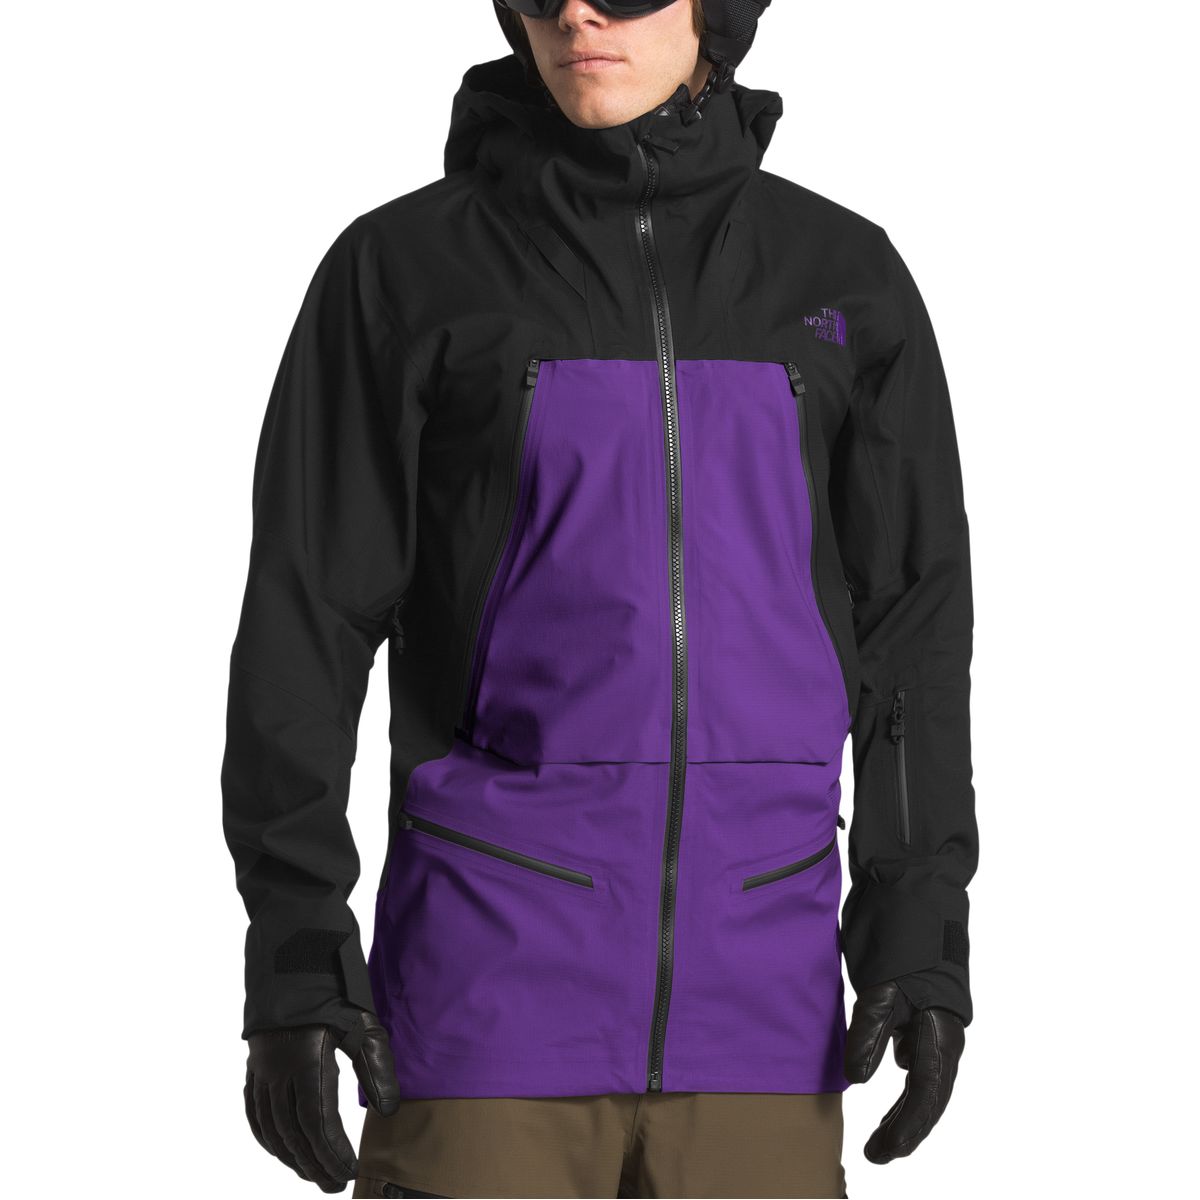 The North Face Purist Jacket - Men's 